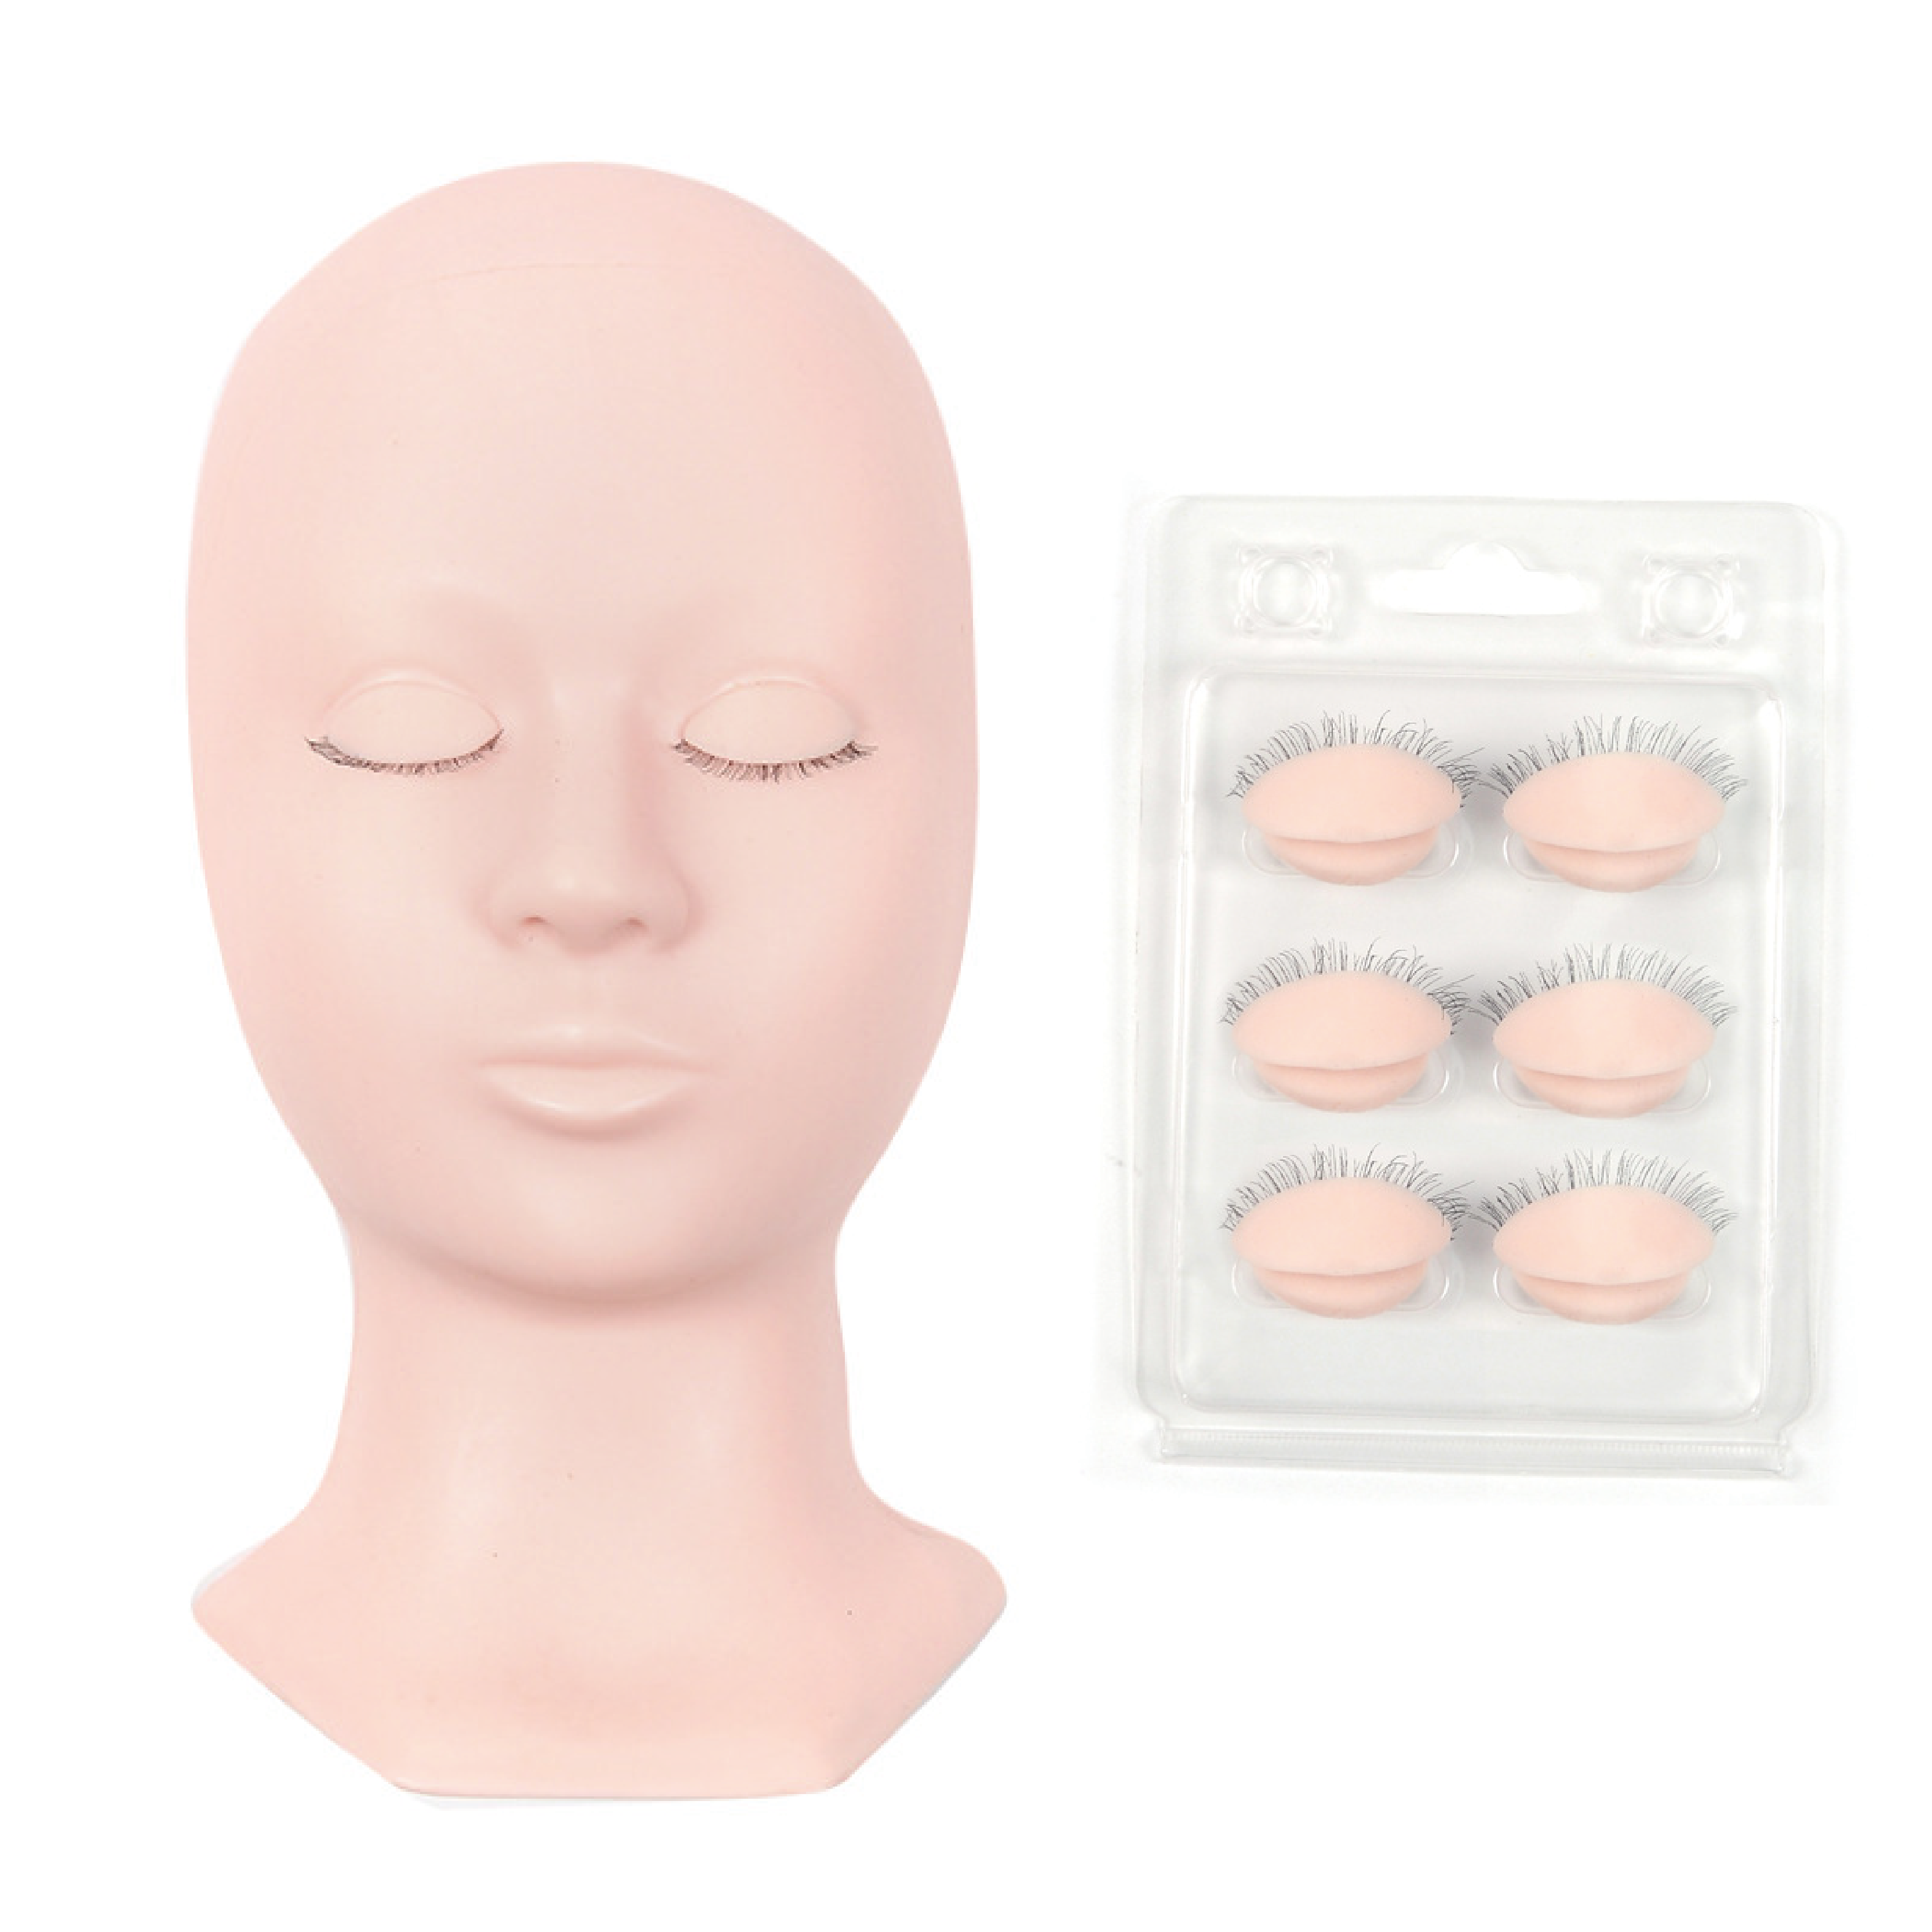 Replaceable Mannequin Head for eyelash extension - DeerLashes